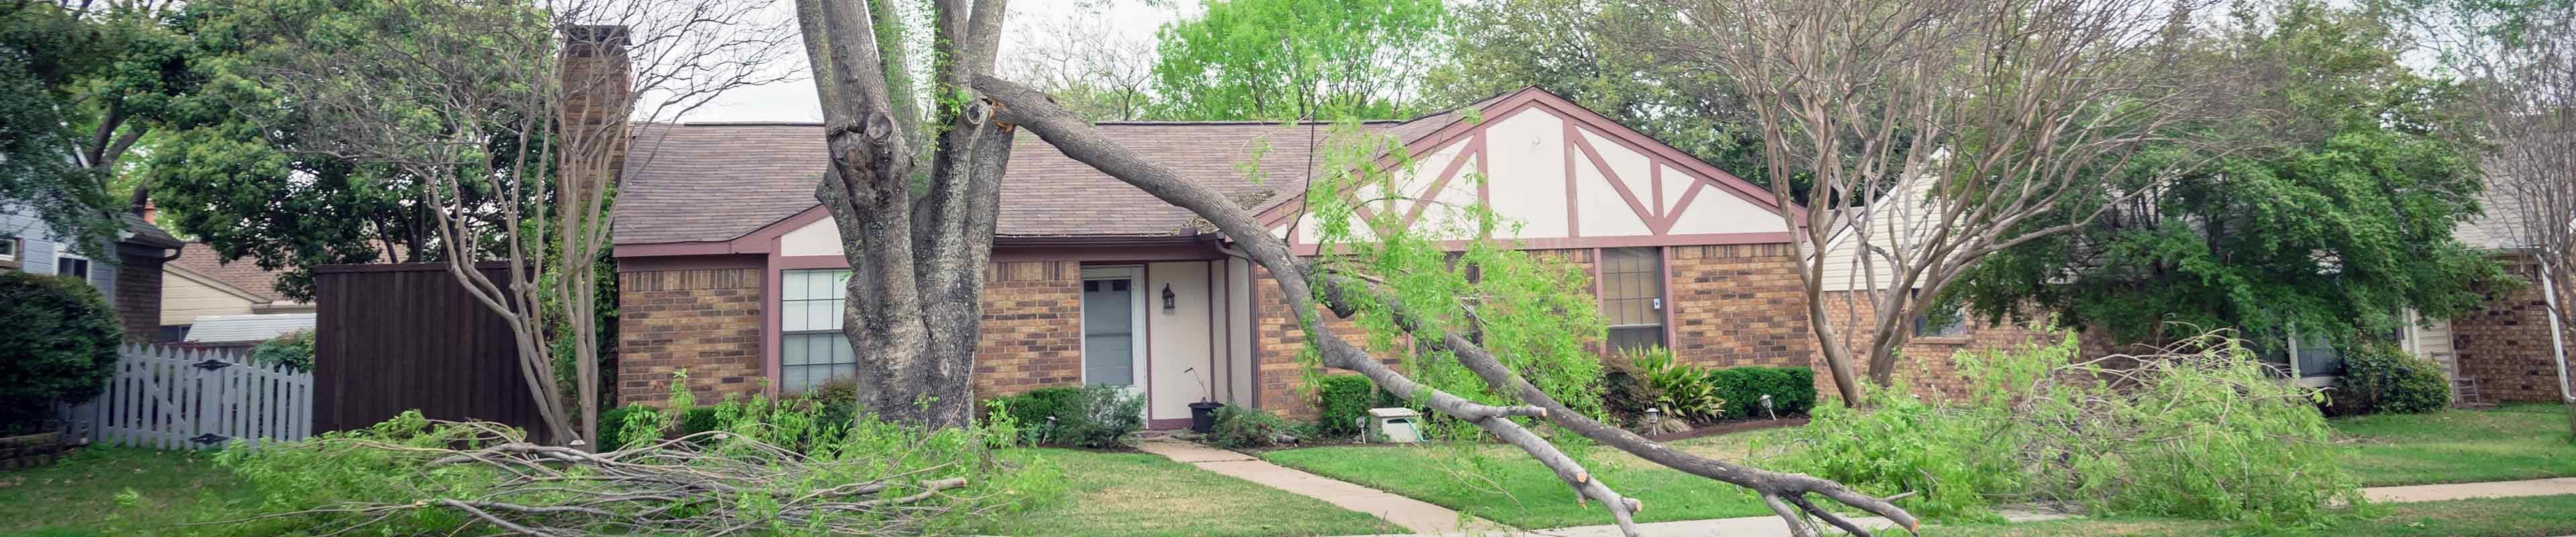 Image of a home's front yard with a tree that's suffered wind damage.